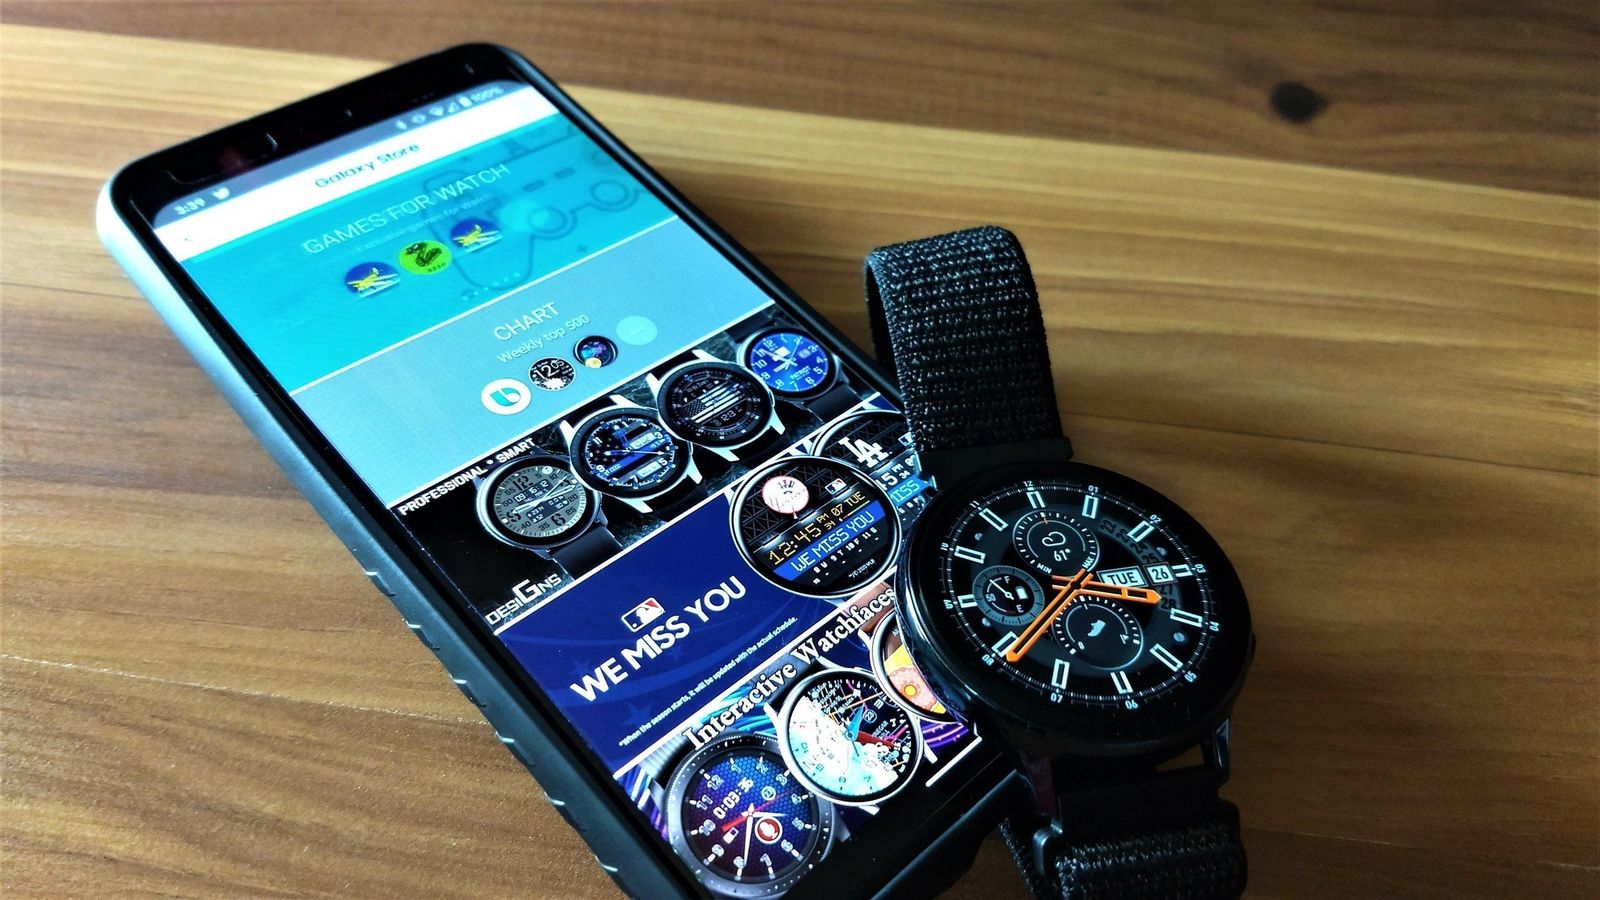 https://www.androidcentral.com/sites/androidcentral.com/files/styles/w1600h900crop_wm_brw/public/article_images/2020/05/galaxy-watch-active-2-store-hero.jpg?itok=KmgU-fFc